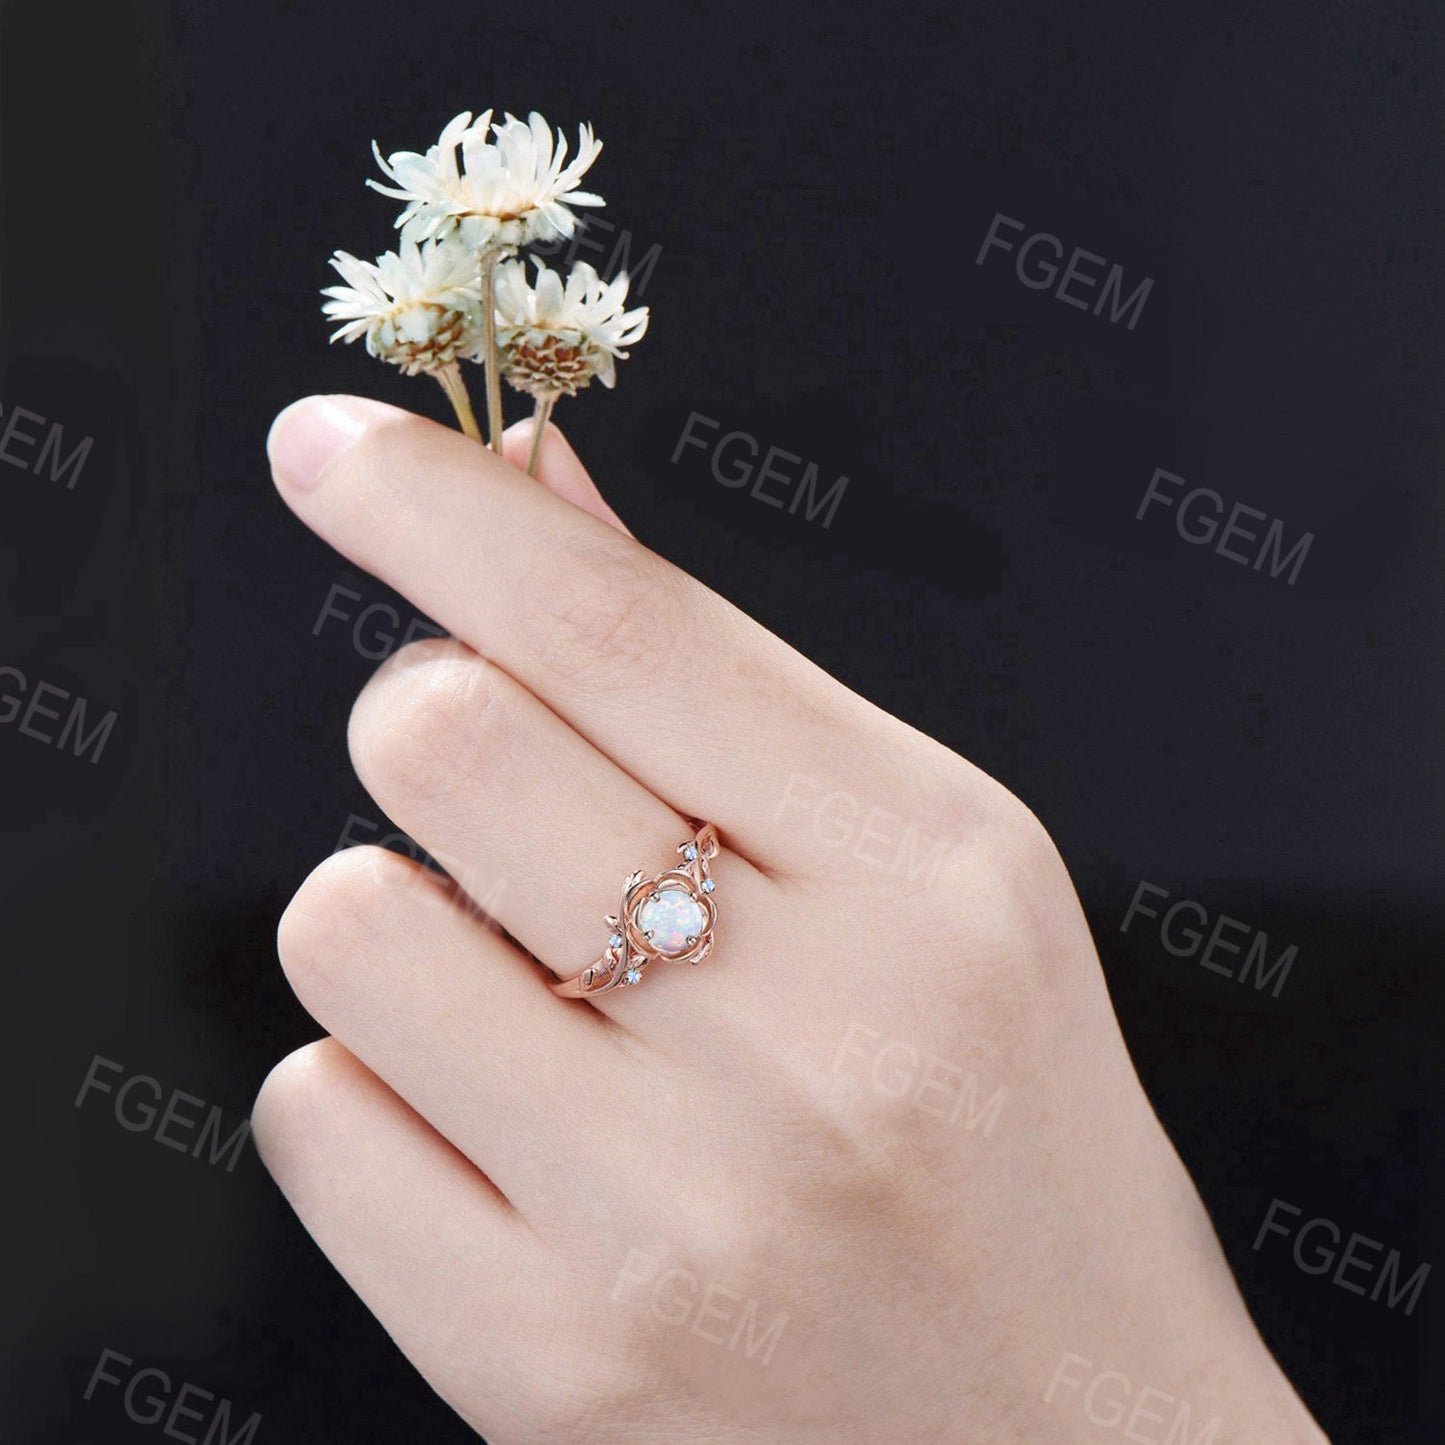 Gold Floral Engagement Ring 5mm Round Cut White Opal Twist Wedding Ring Nature Inspired Leaf Opal Jewelry Rose Flower Moonstone Promise Ring